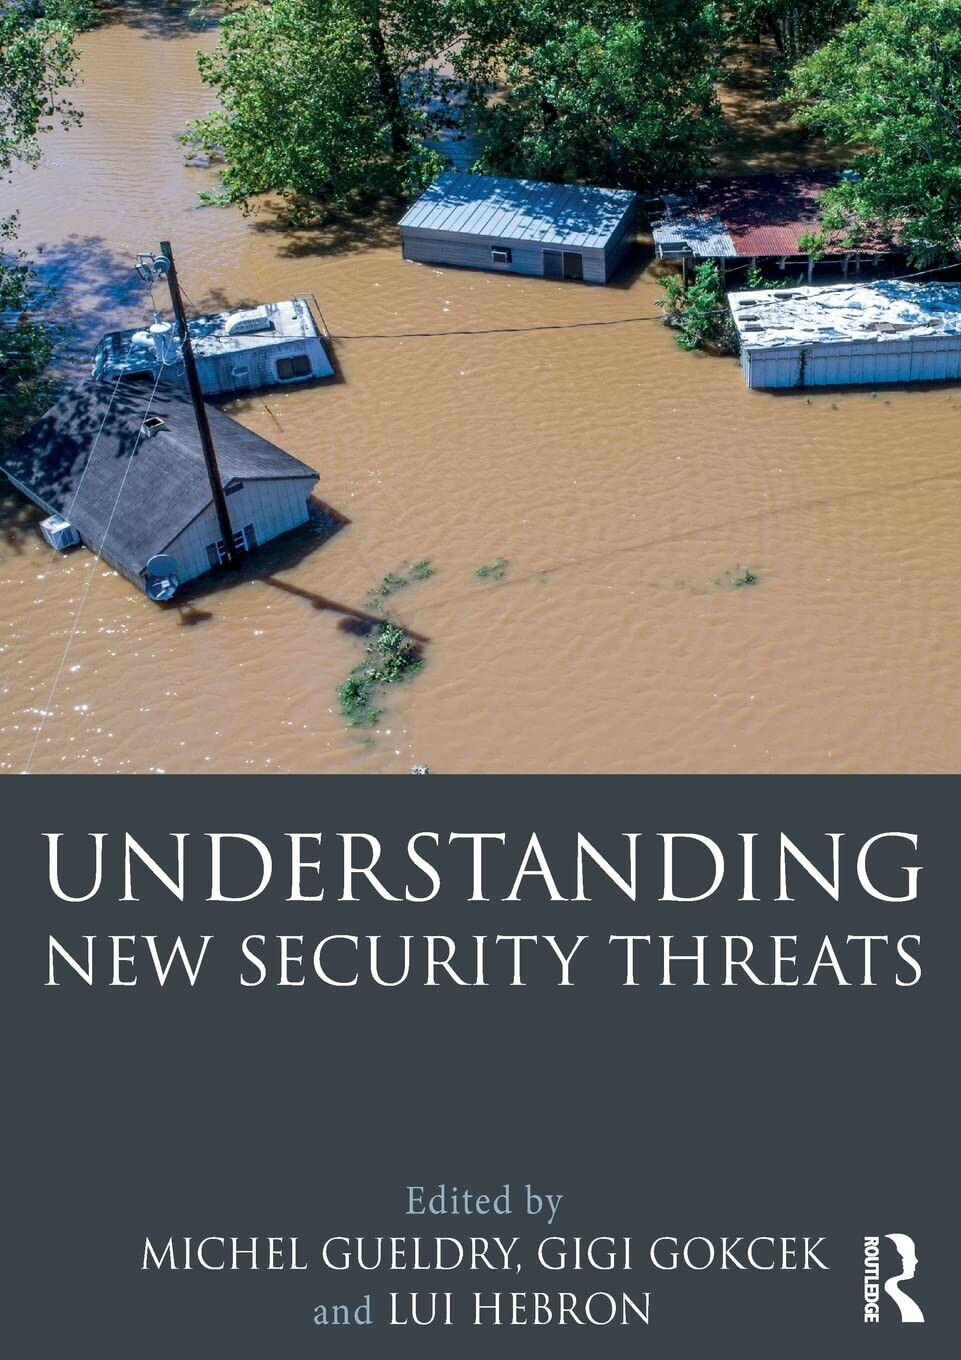 Understanding New Security Threats - Michel Gueldry - Routledge, 2019